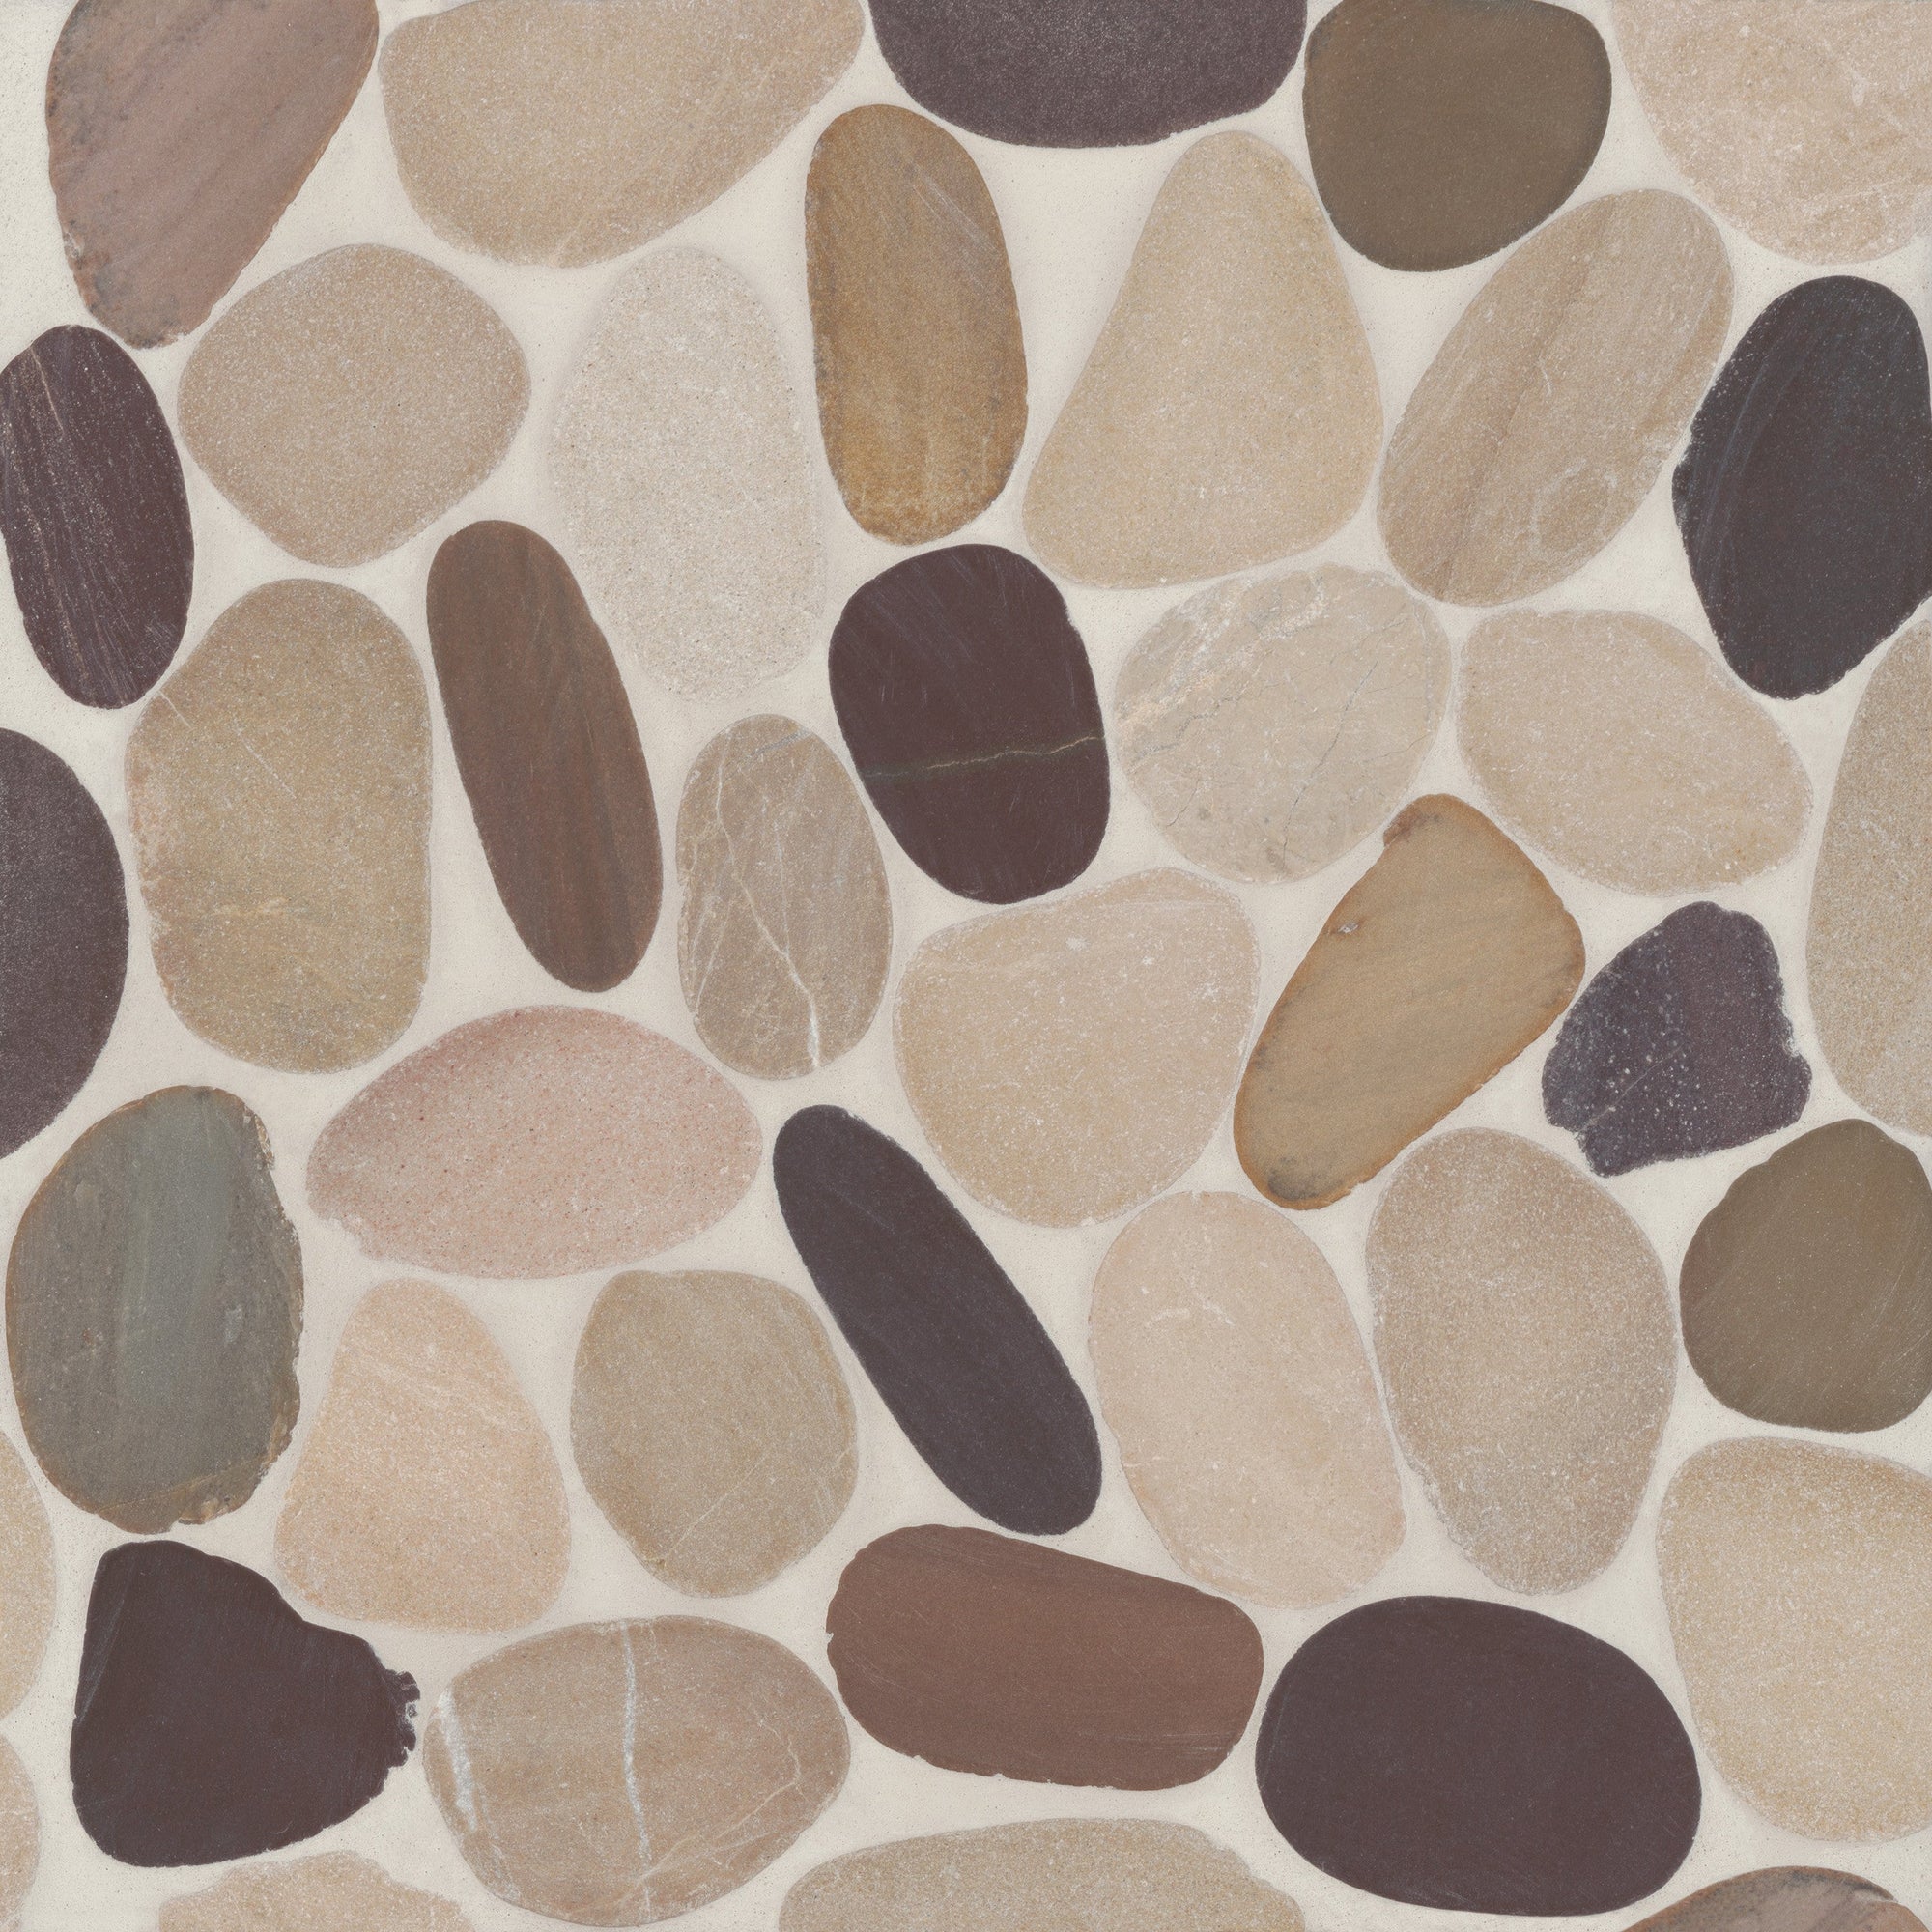 Bedrosians Tile & Stone - Waterbrook 12" x 12" Jumbo Sliced Pebble Mosaic Tile - Tan and Brown and Cherry